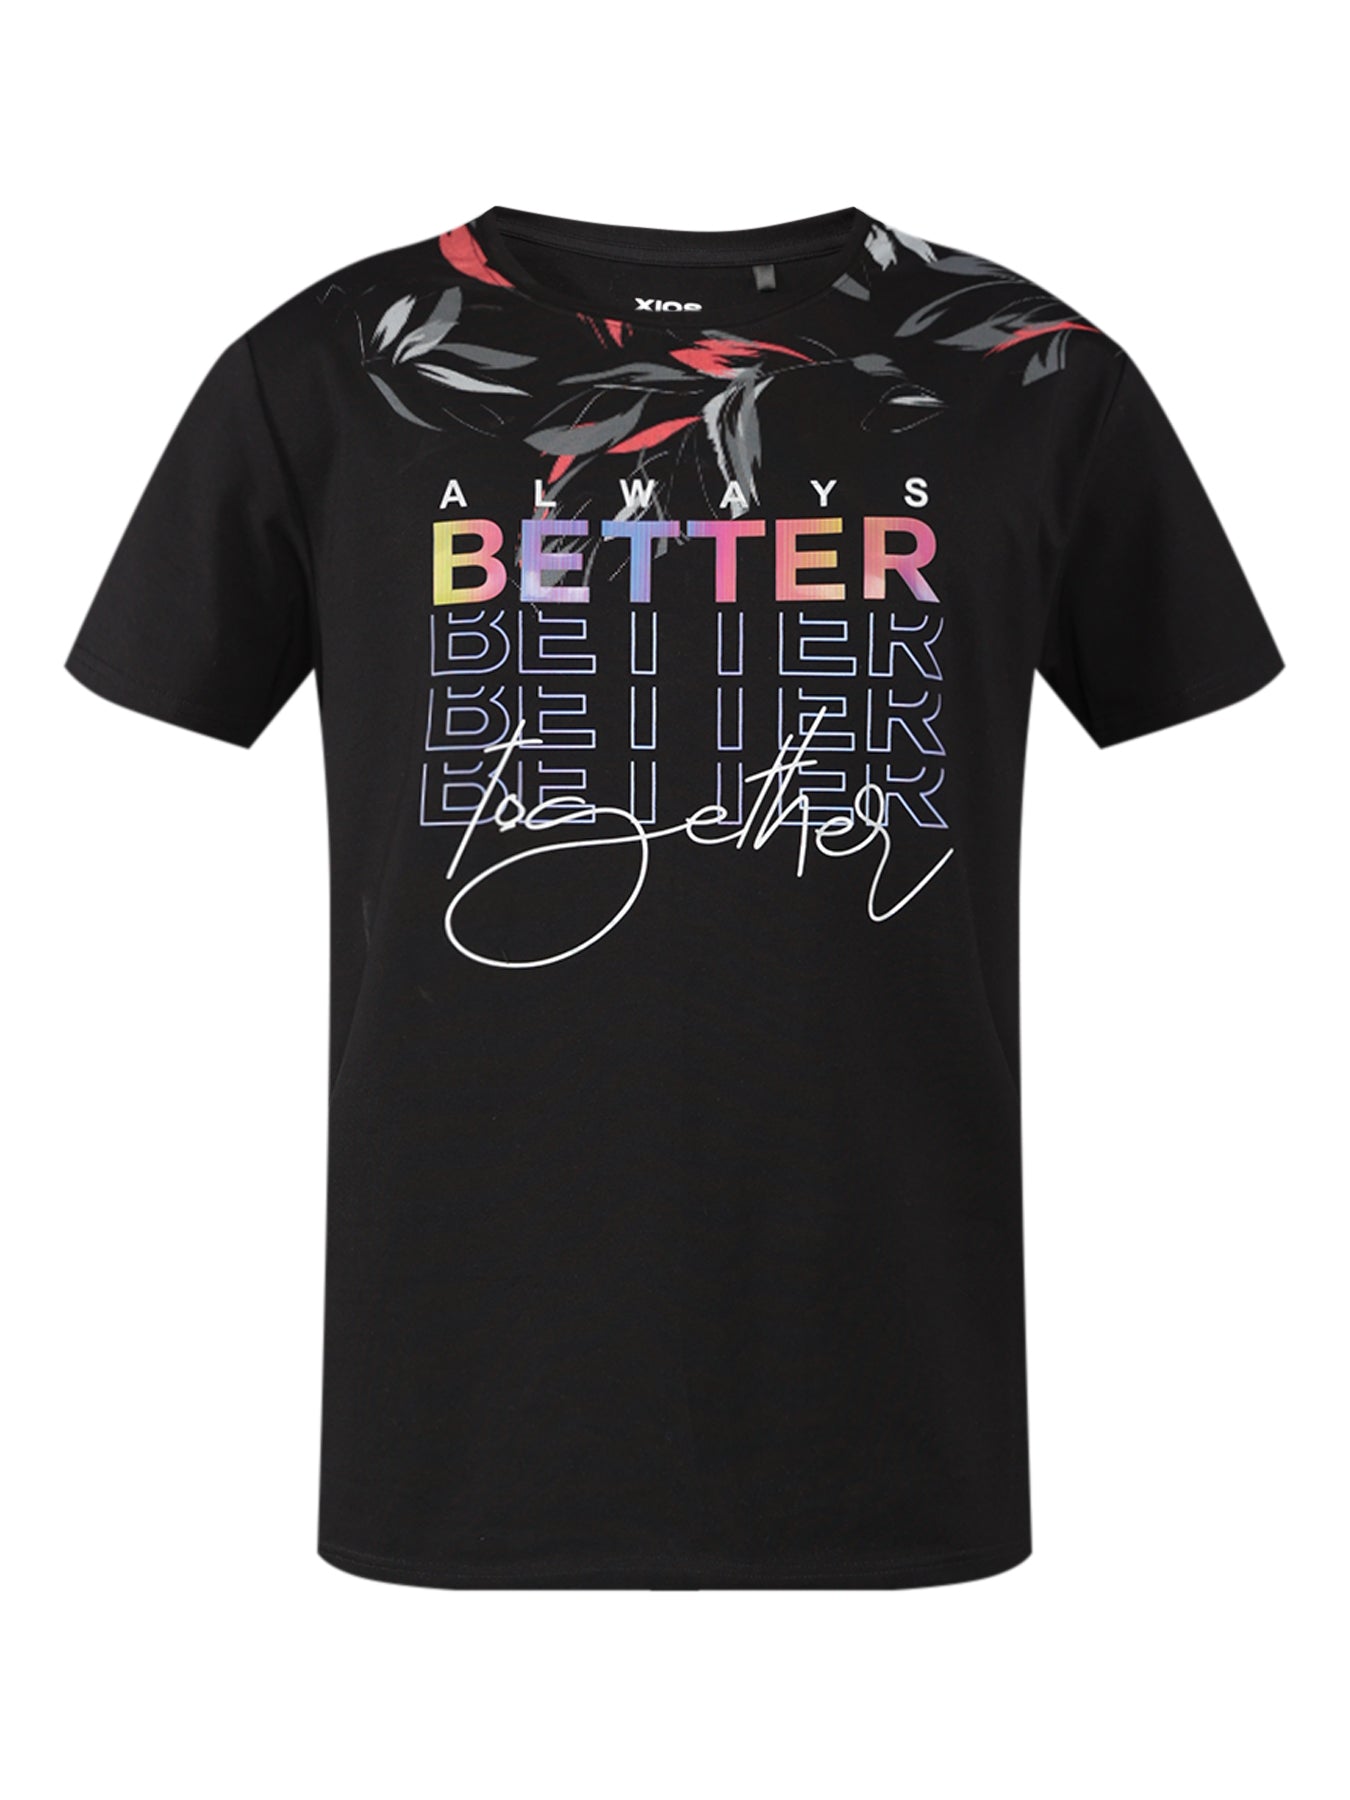 "Always Better Together" Graphic Tee - XIOS America